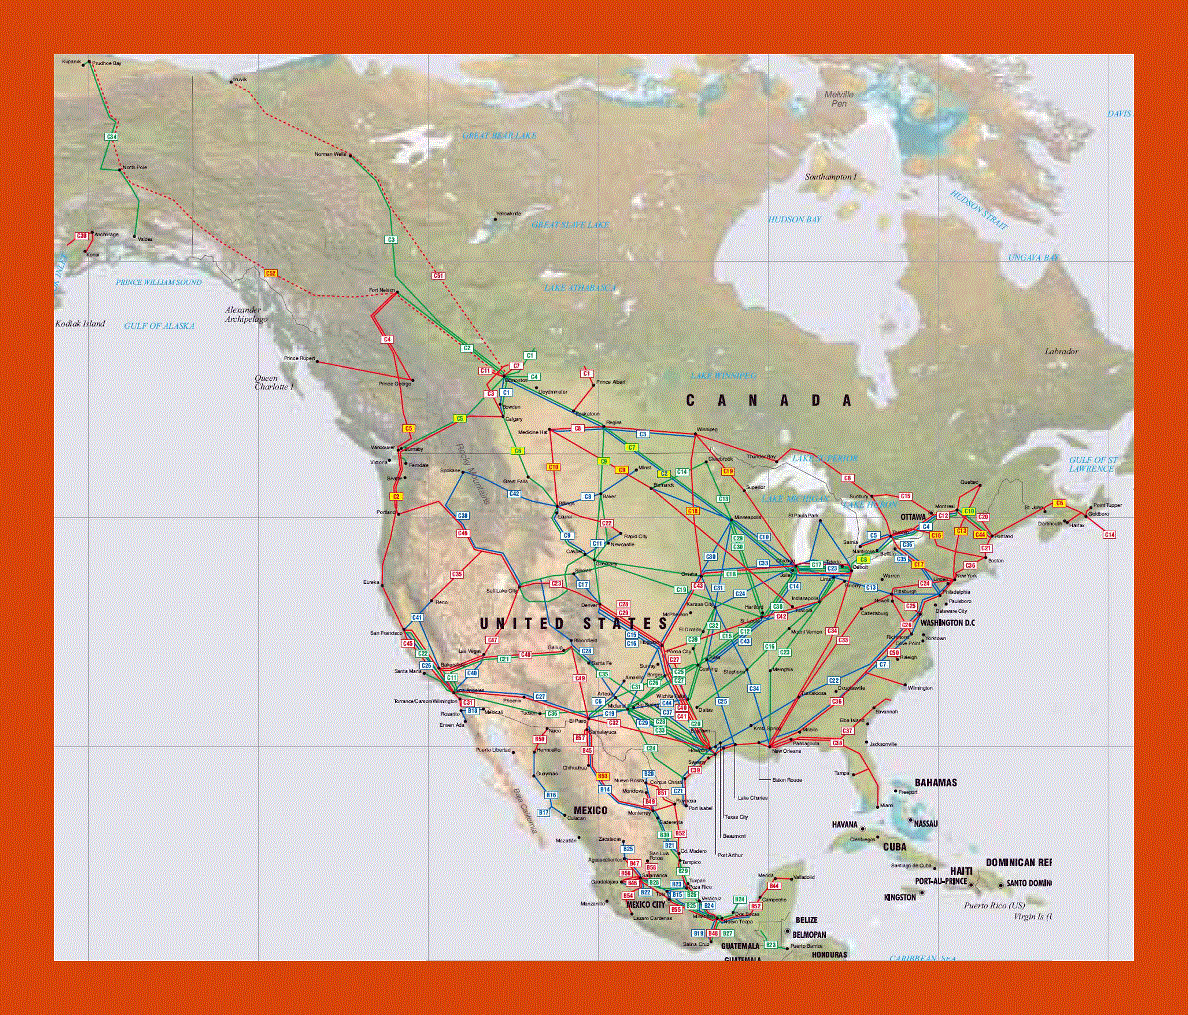 Pipelines map of North America